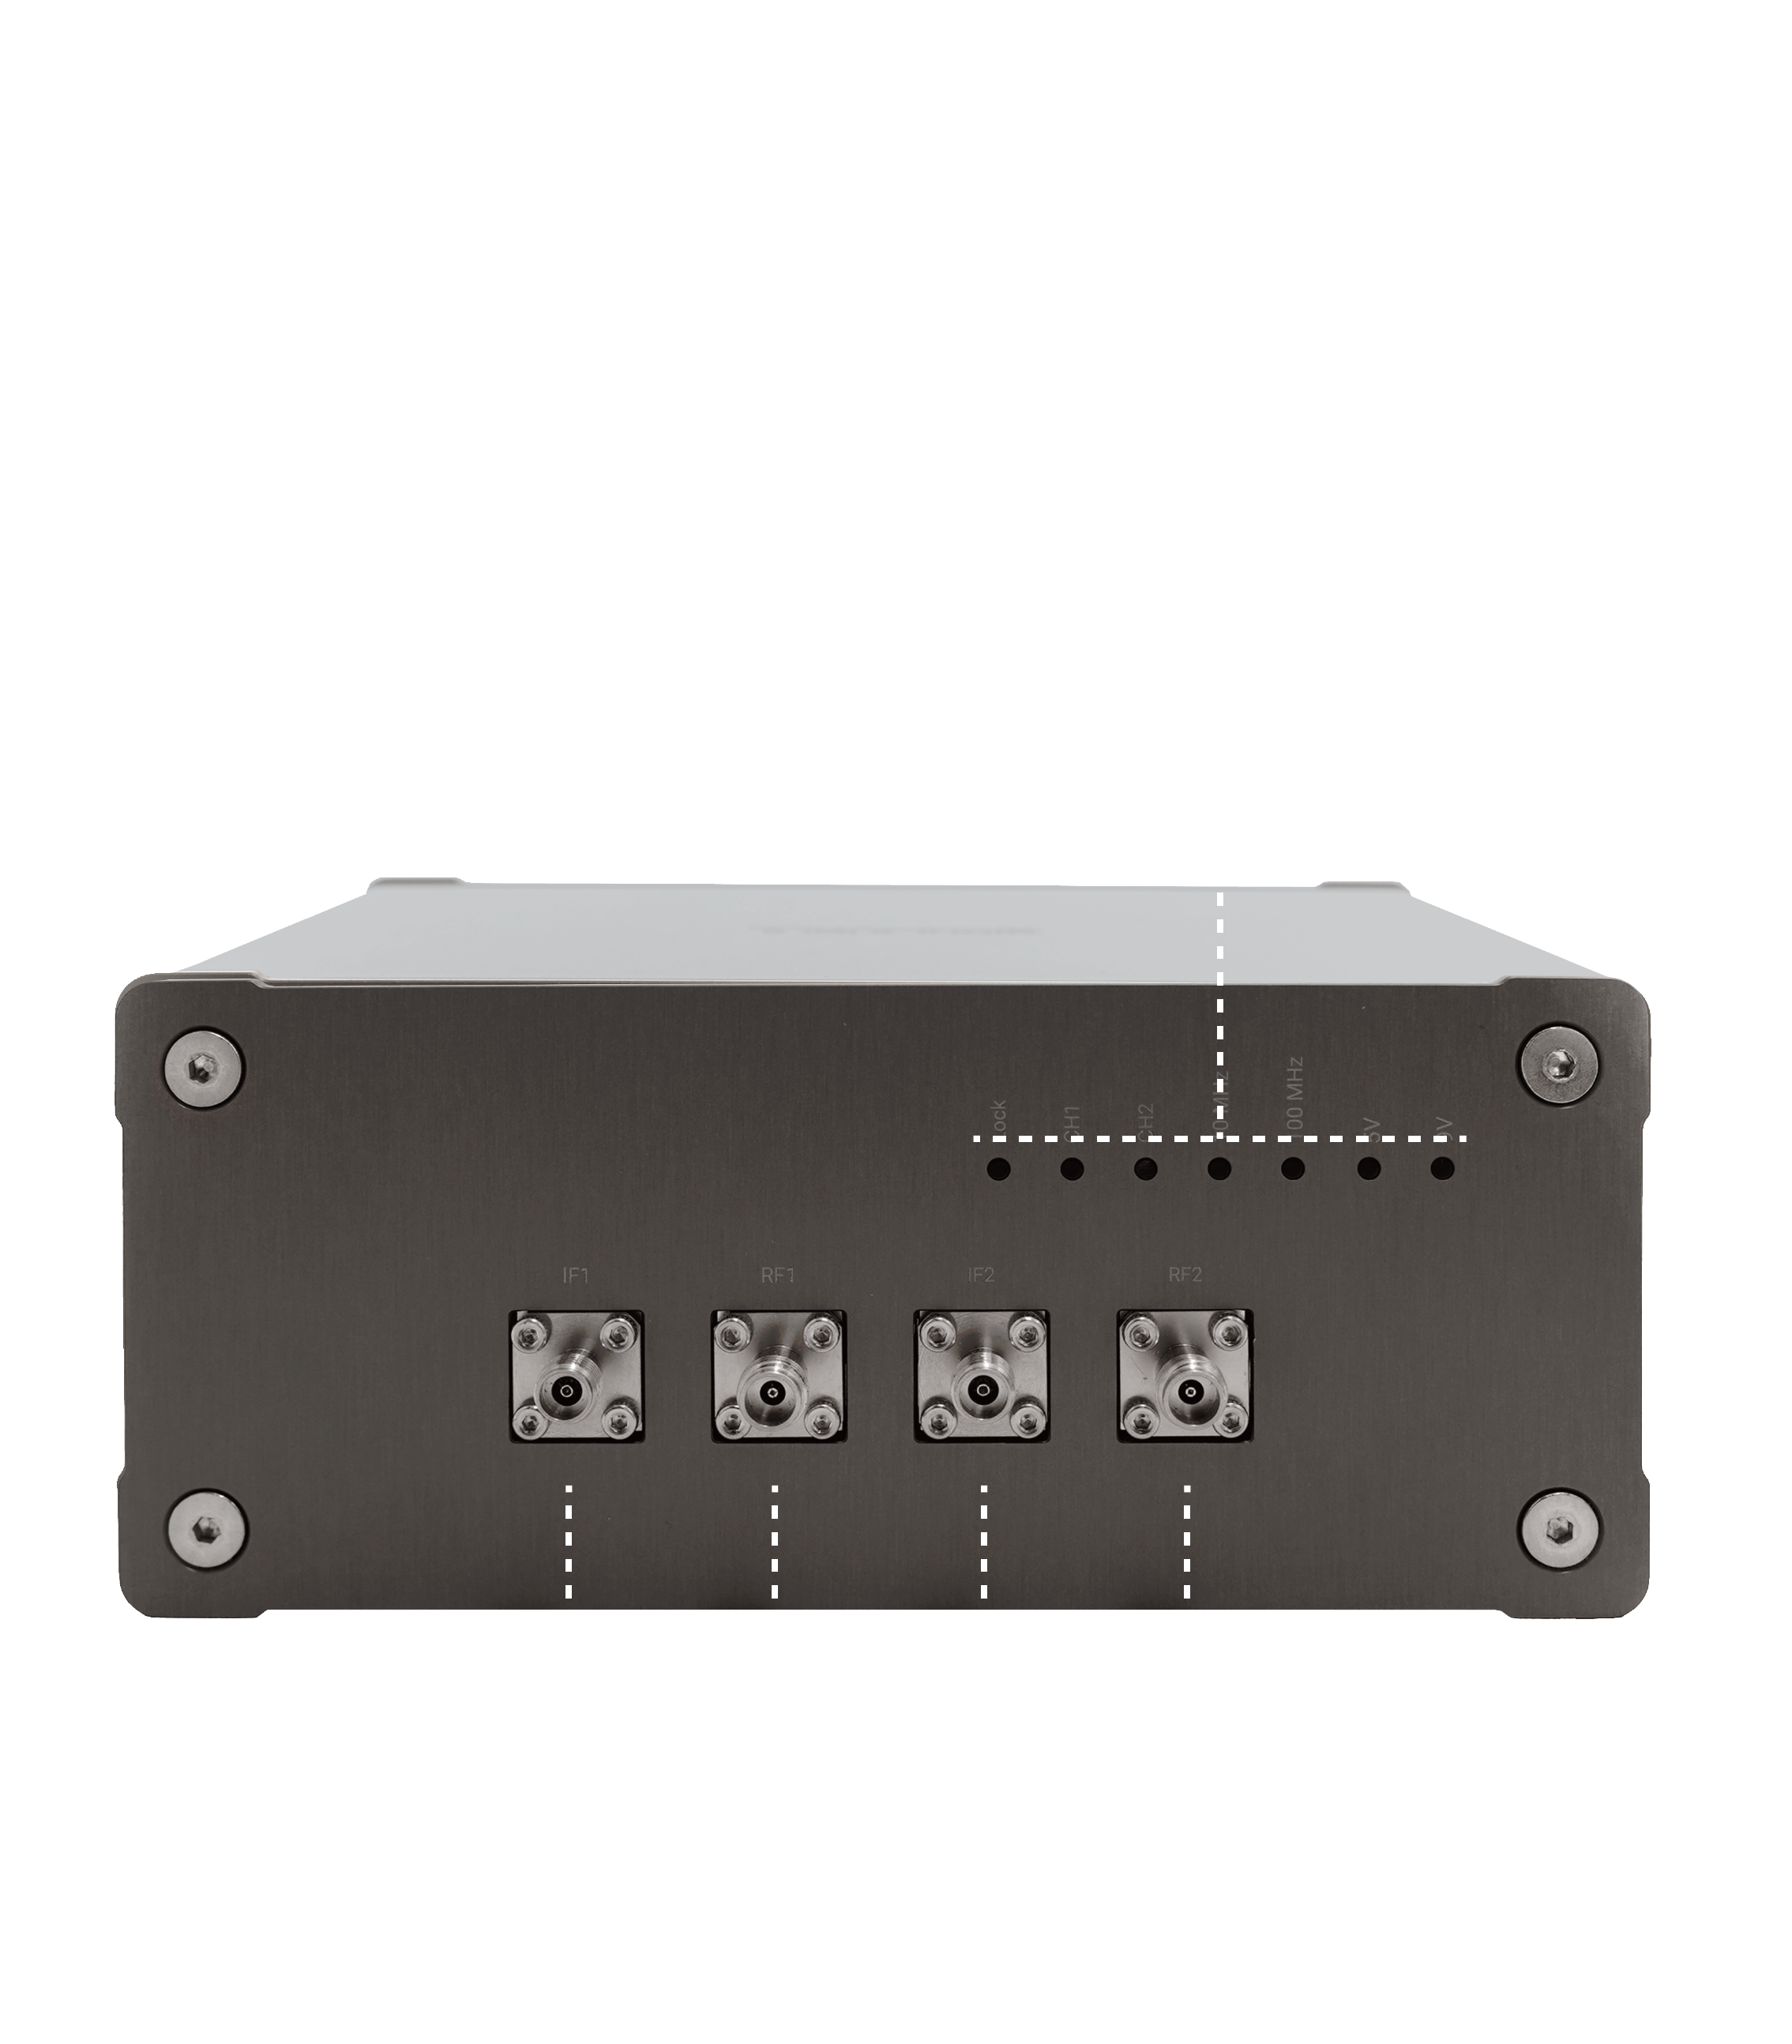 Front of UD Box with dual channels. IF1, RF1, IF2, RF2. One the front panel, there are 7 LED lights that indicate the status of UD Box, eg., the channel being used, 10/ 100 MHz Sync, etc.